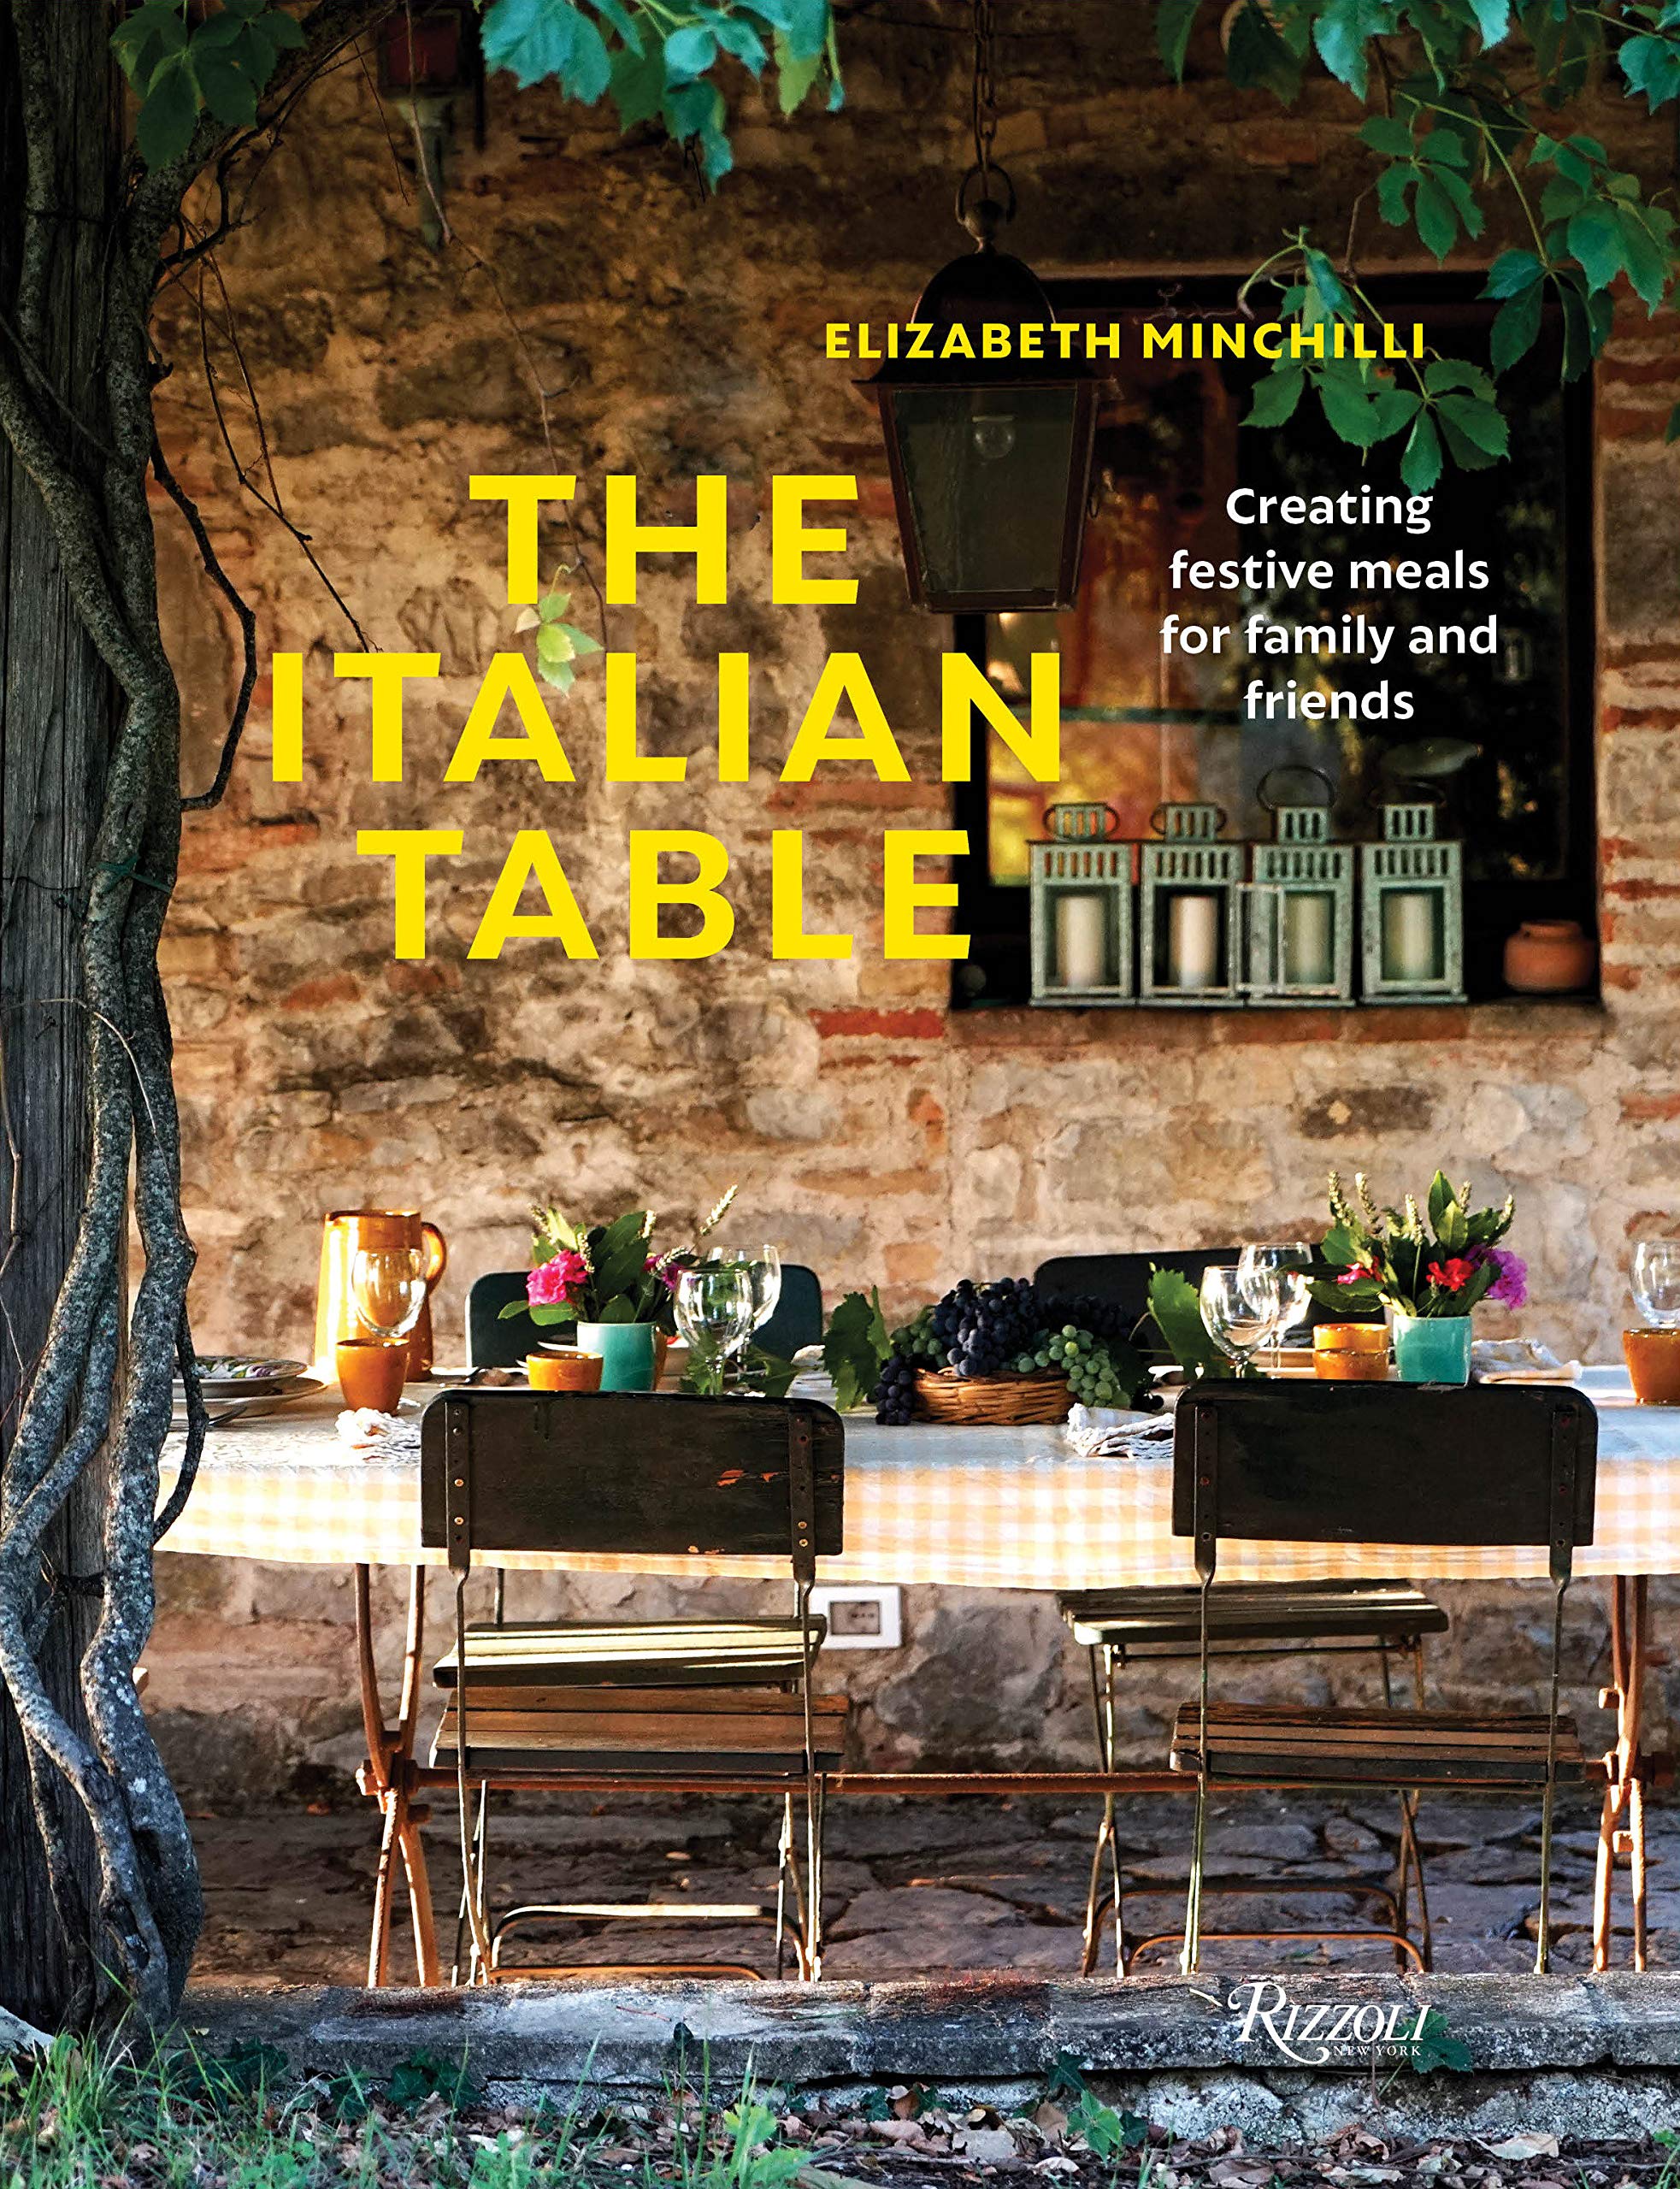 The Italian Table: Creating festive meals for family and friends (Elizabeth Minchilli)